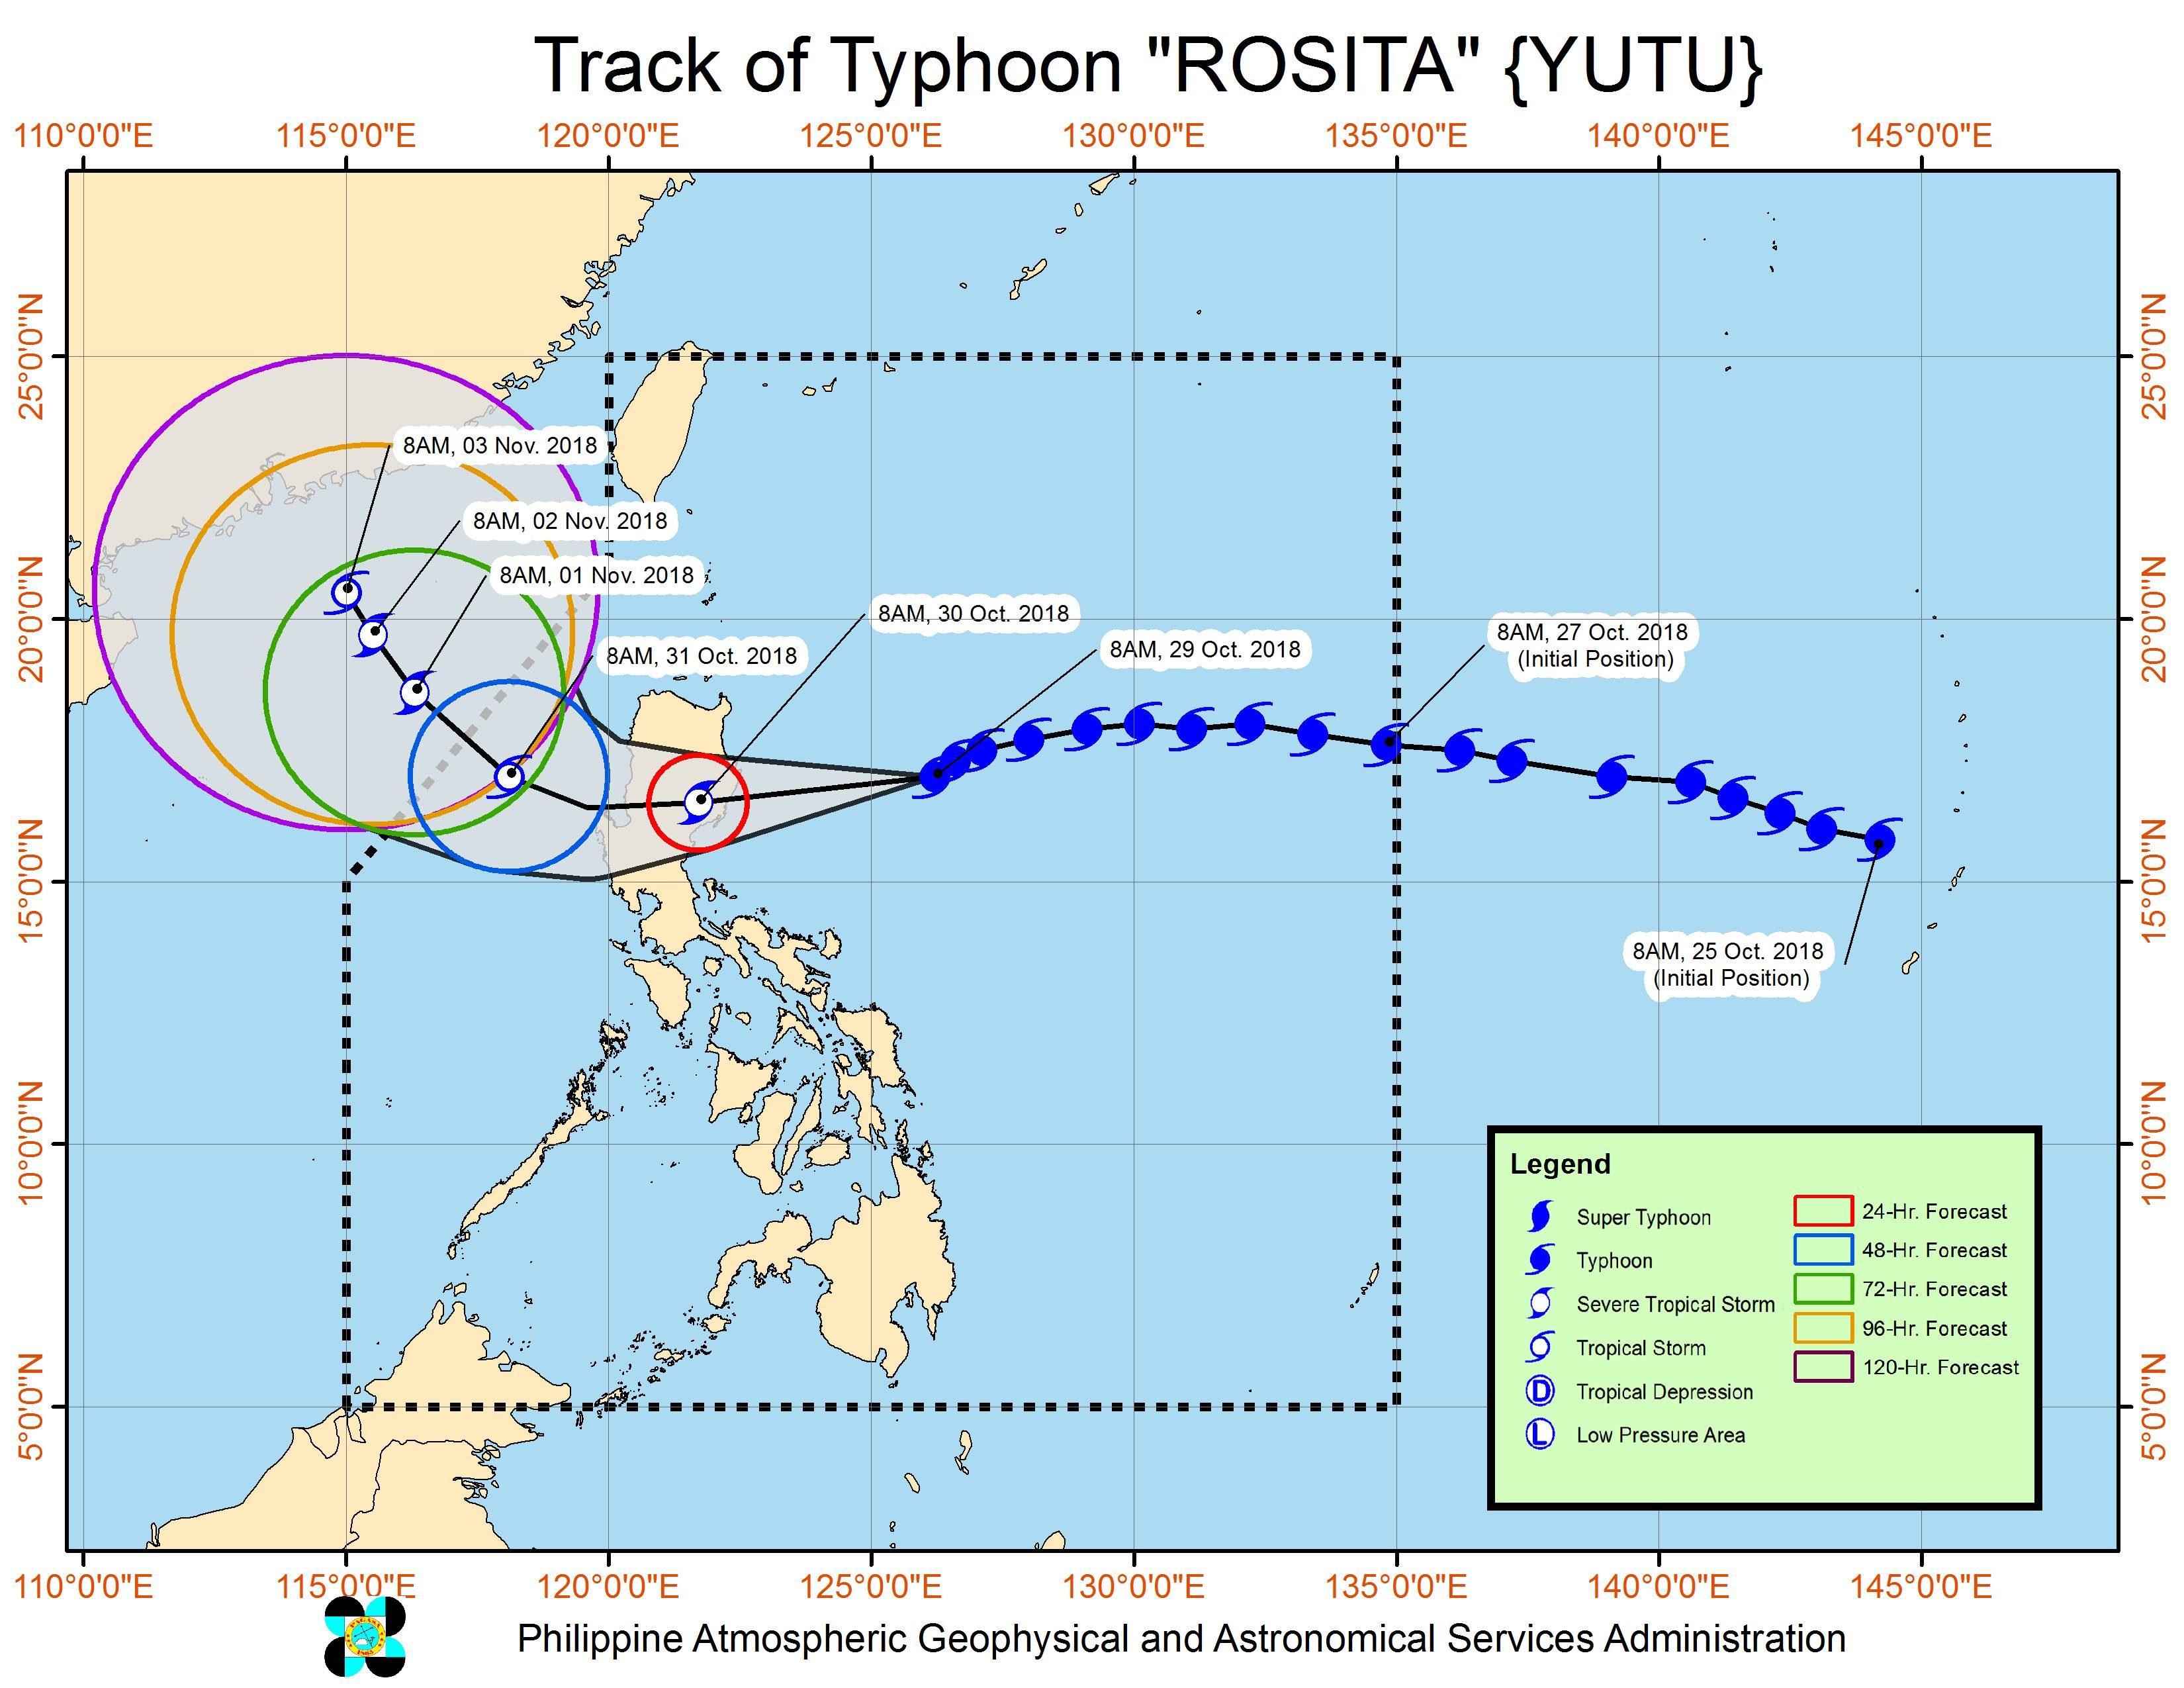 Forecast track of Typhoon Rosita (Yutu) as of October 29, 2018, 11 am. Image from PAGASA 